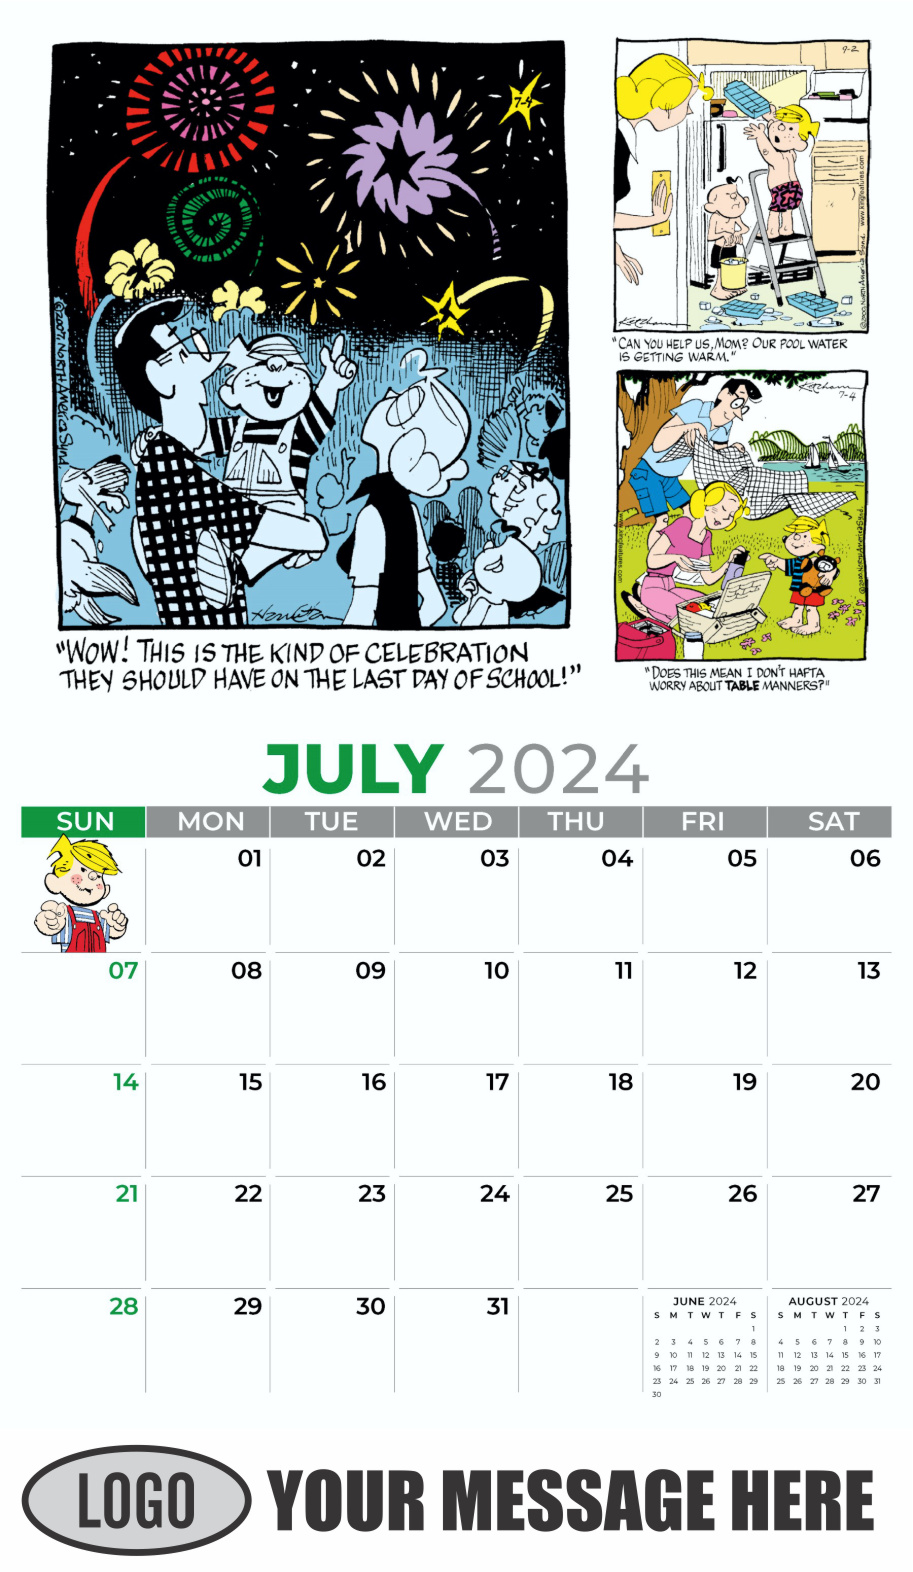 Dennis the Menace 2024 Business Promotional Wall Calendar - July